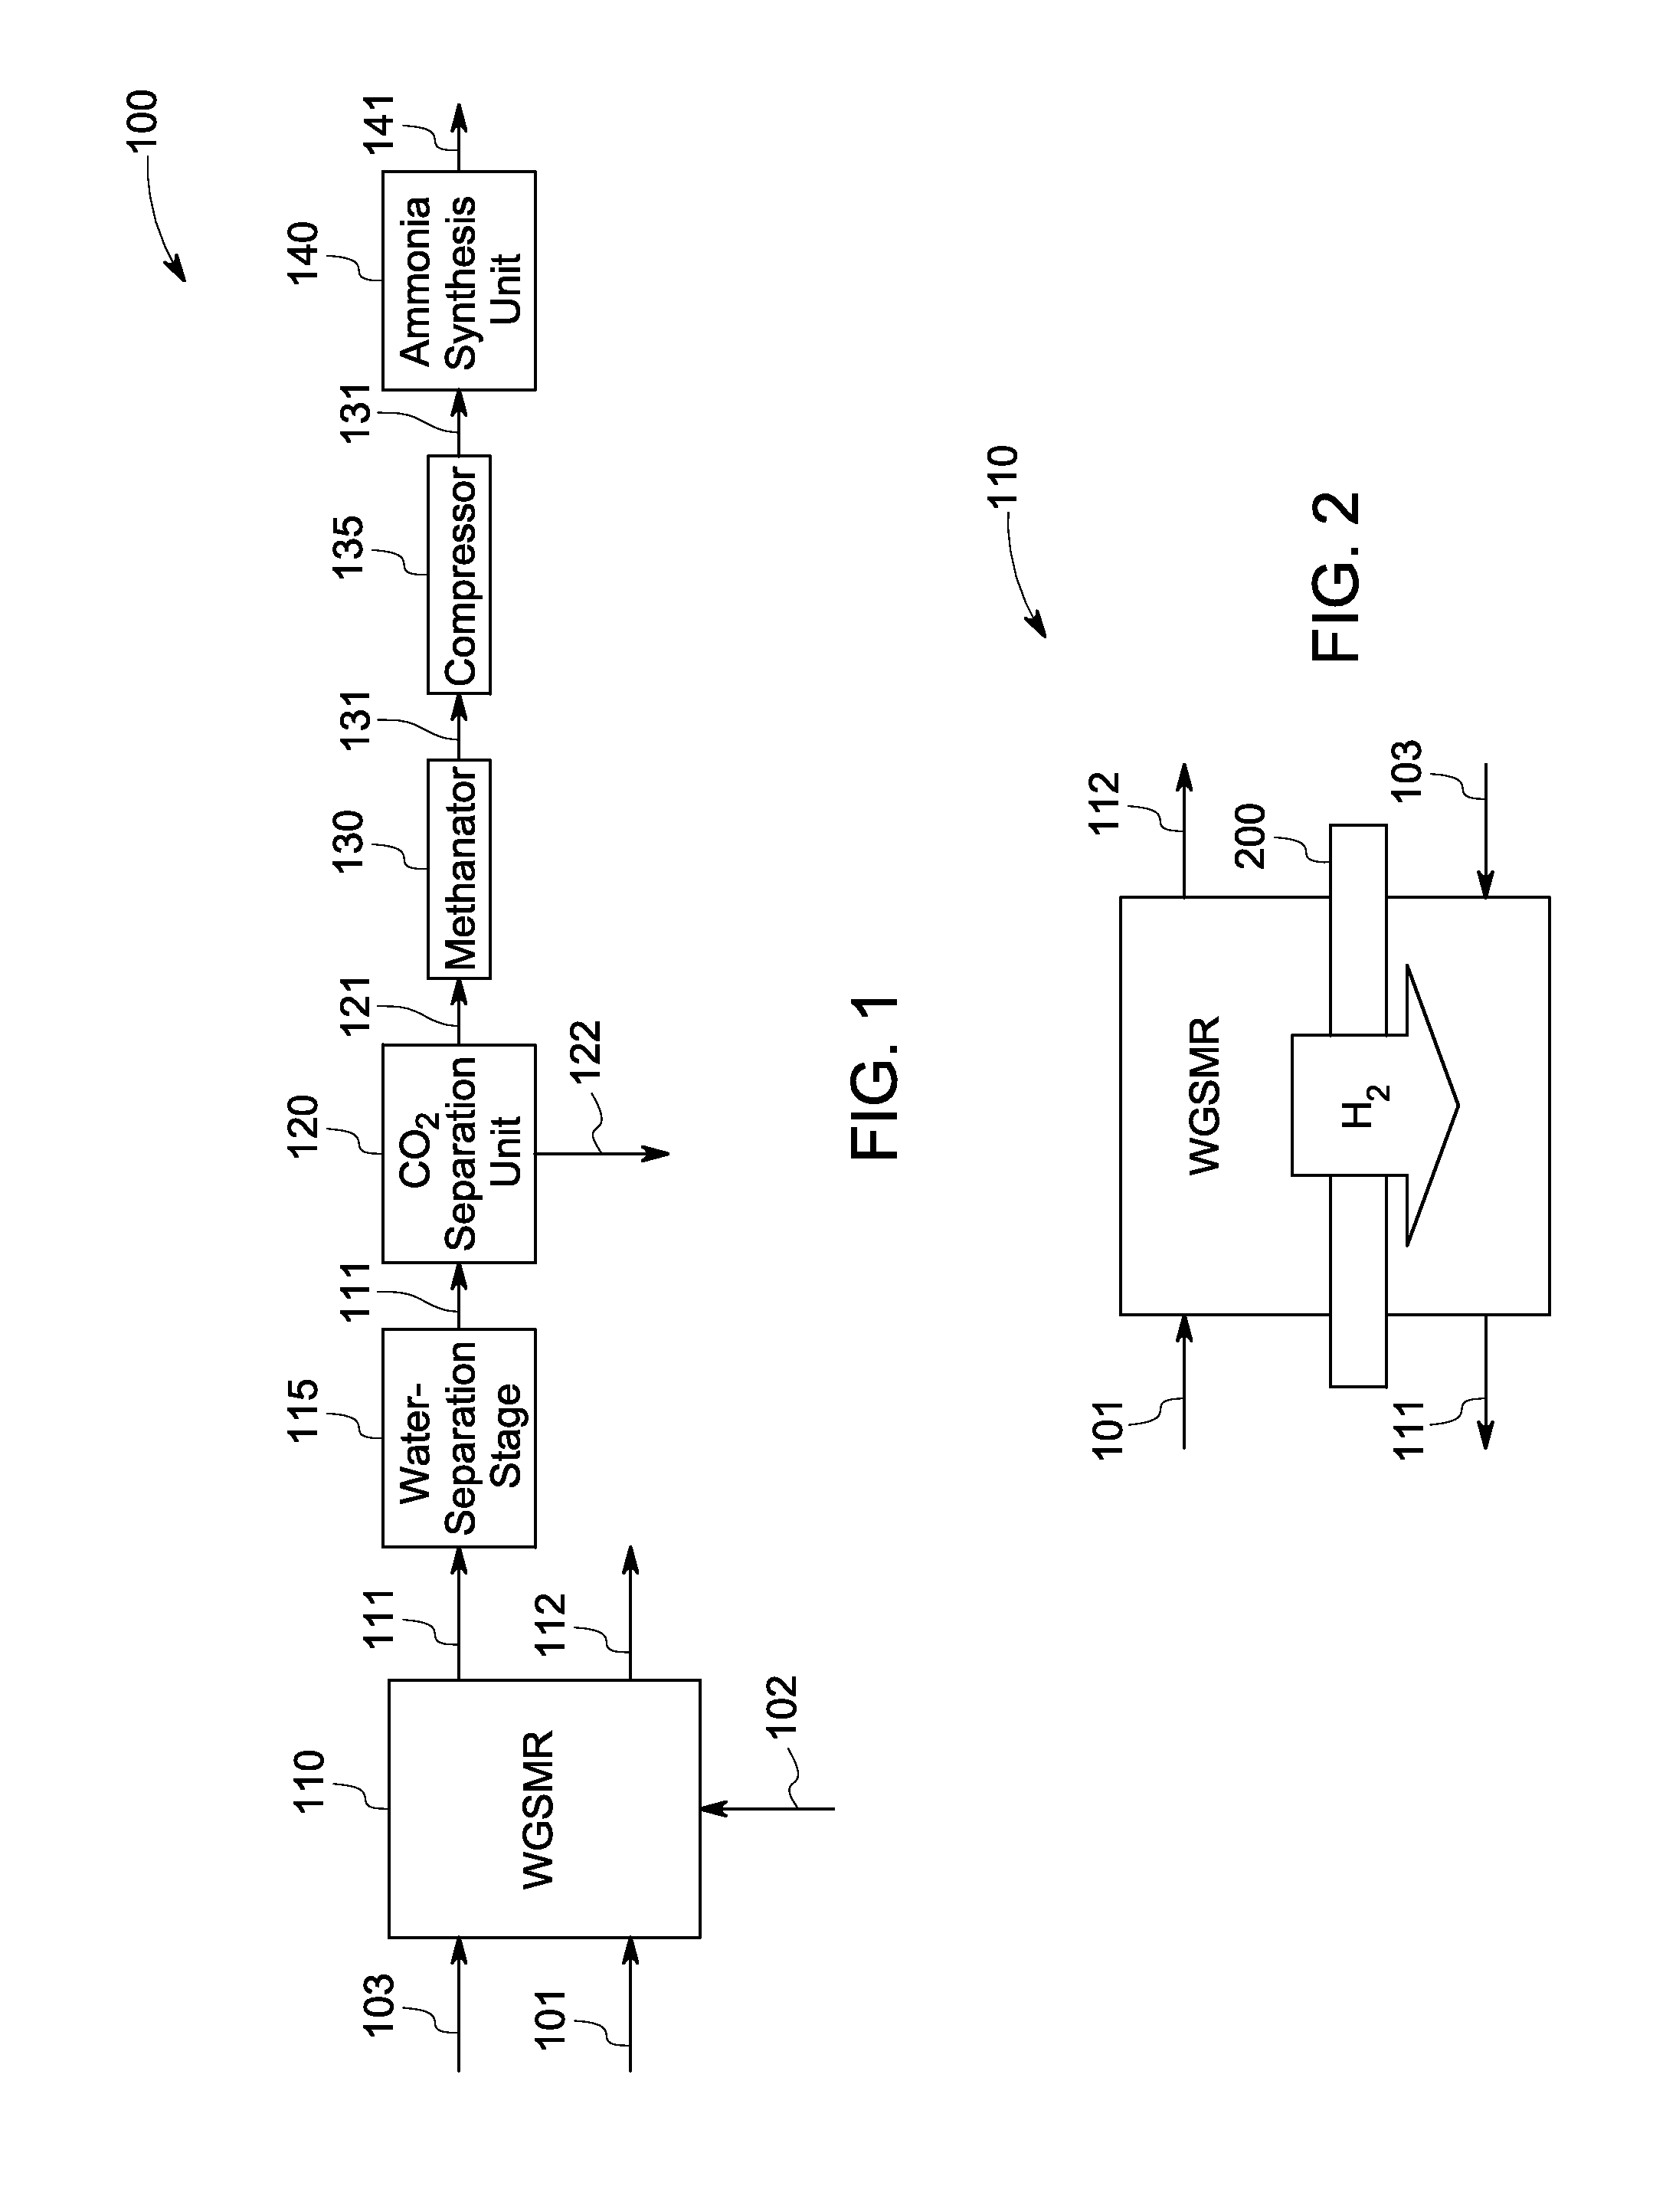 Methods and systems for ammonia production